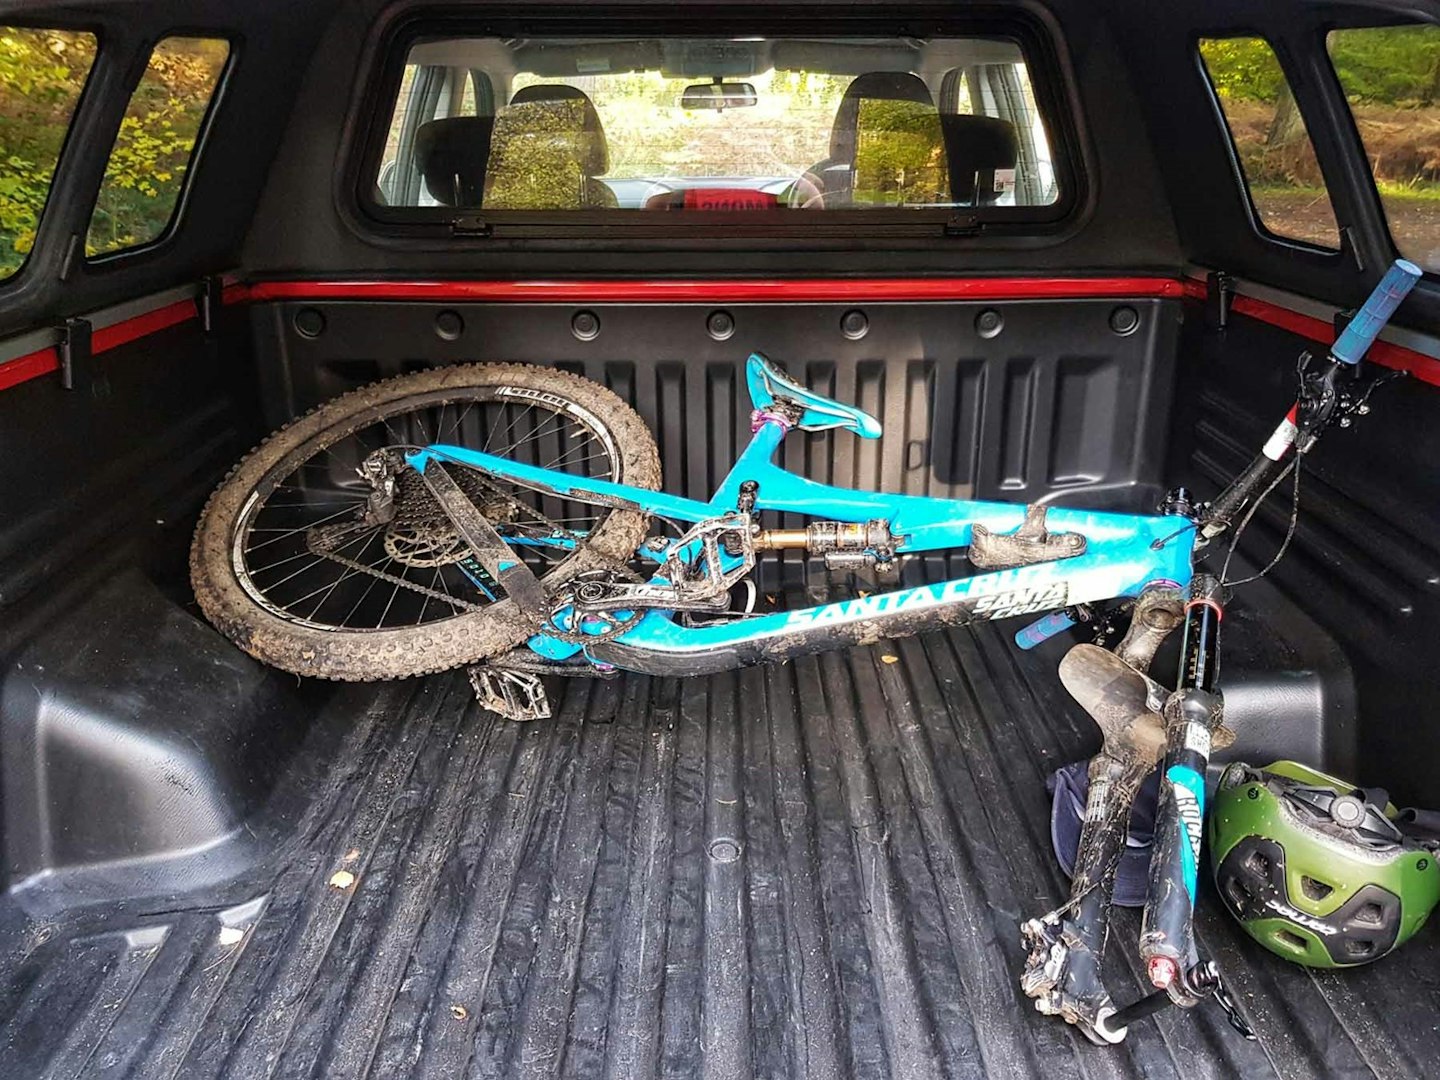 2019 SsangYong Musso with bike in the back